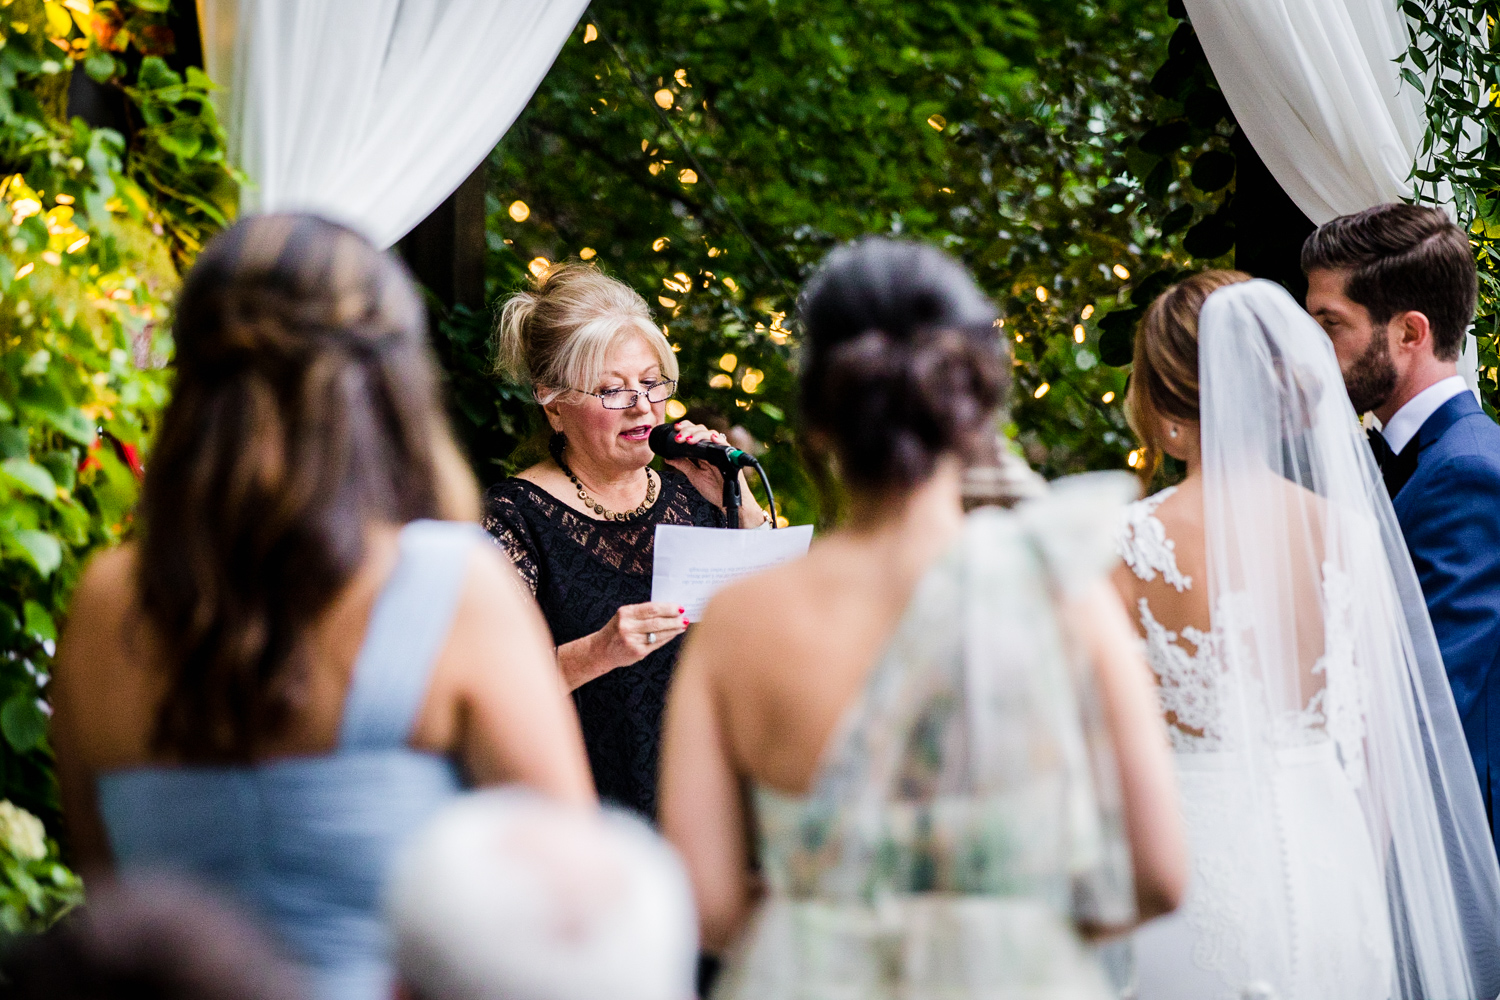 A guest gives a reading during a Gallery Marchetti wedding.